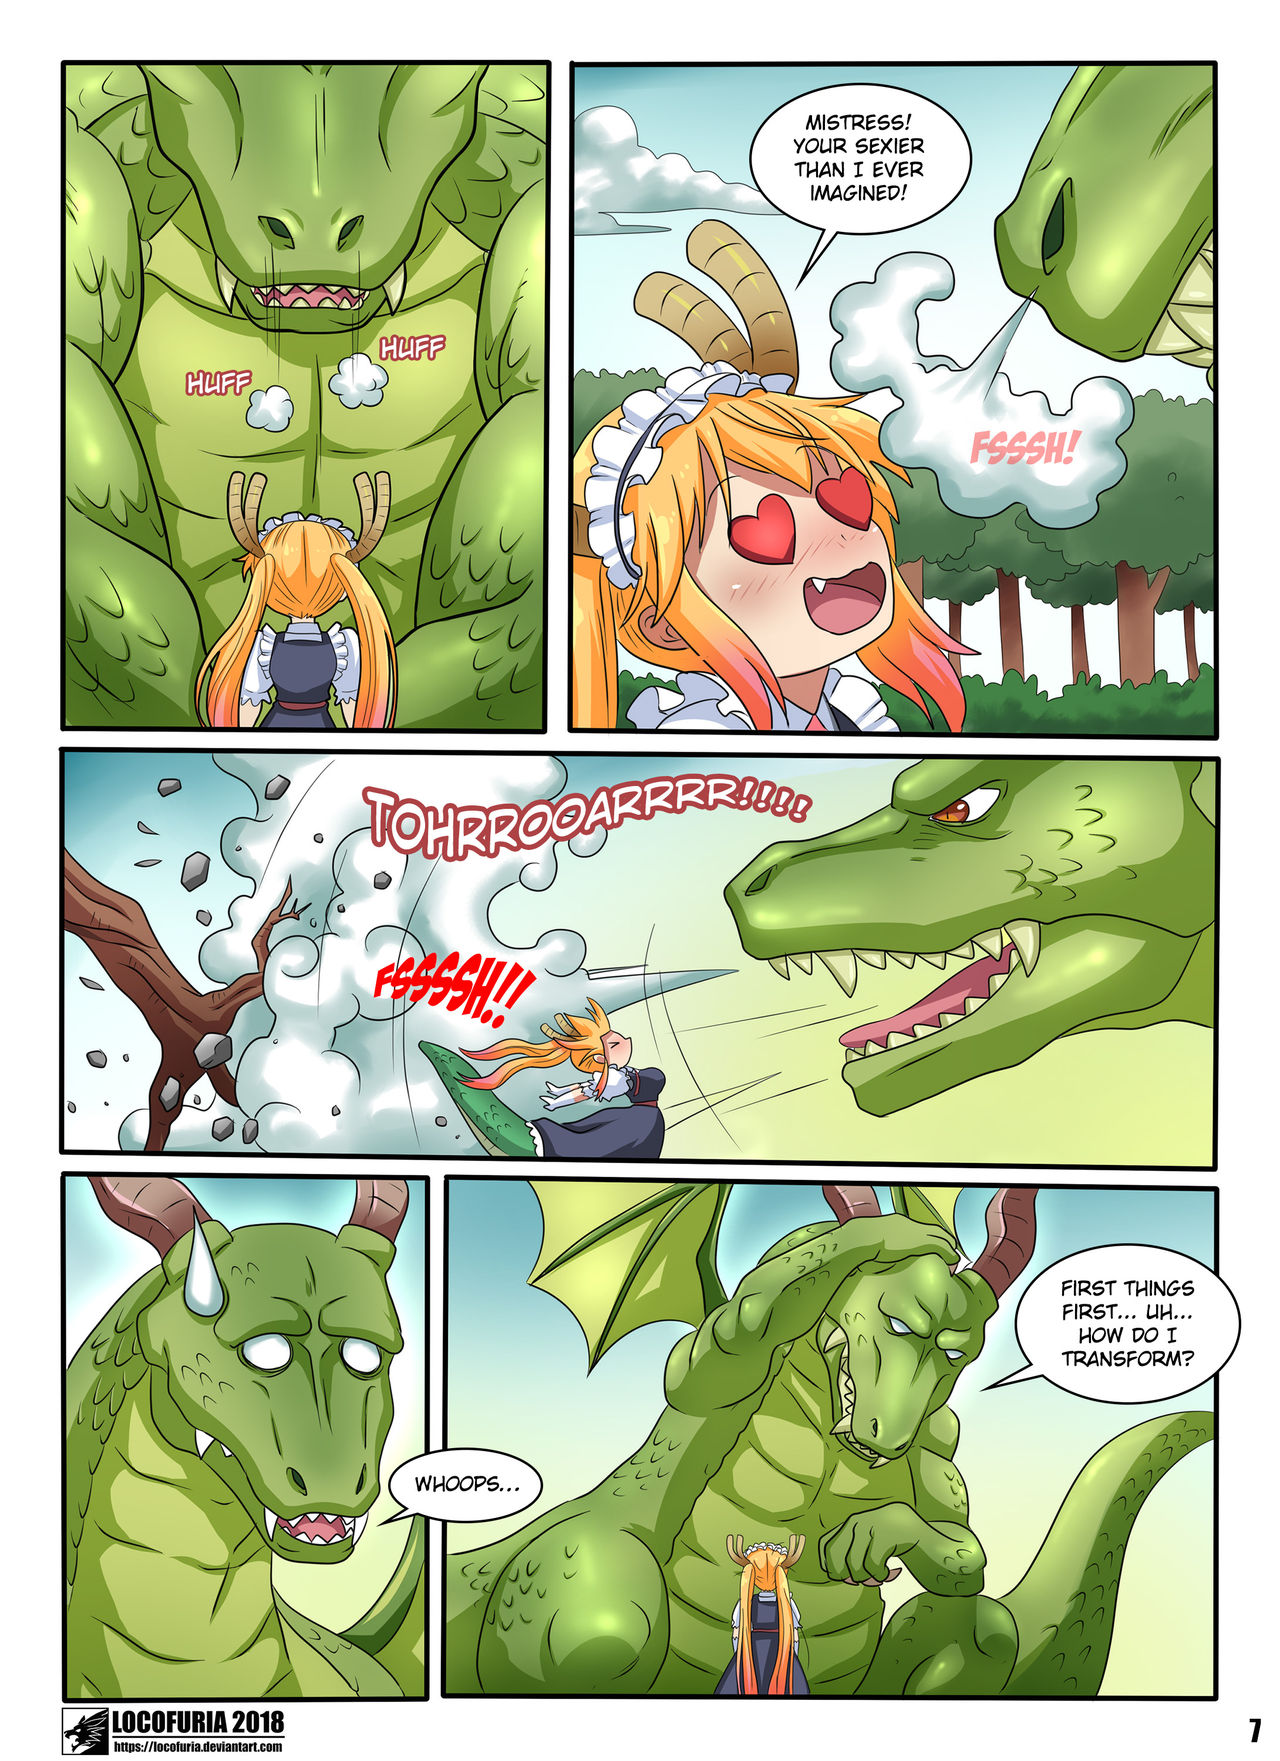 Dragon Tales Porn - A Dragons Tale - Page 9 - HentaiEra